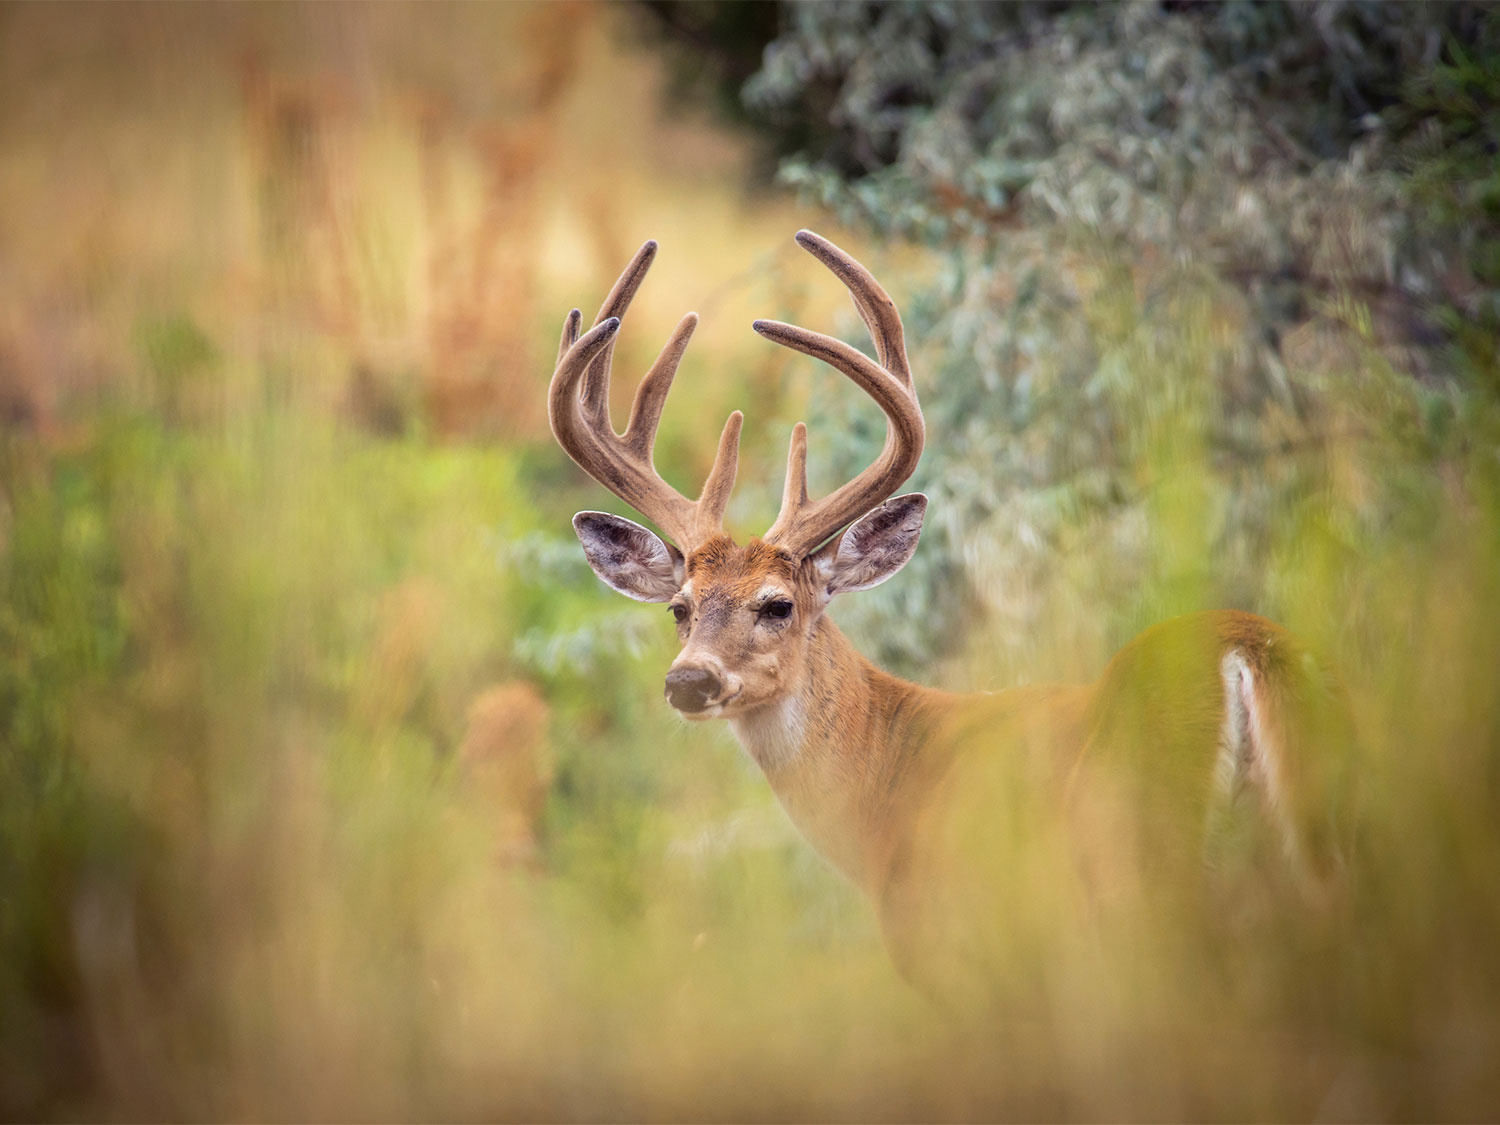 A whitetail buck standing in tall grass.